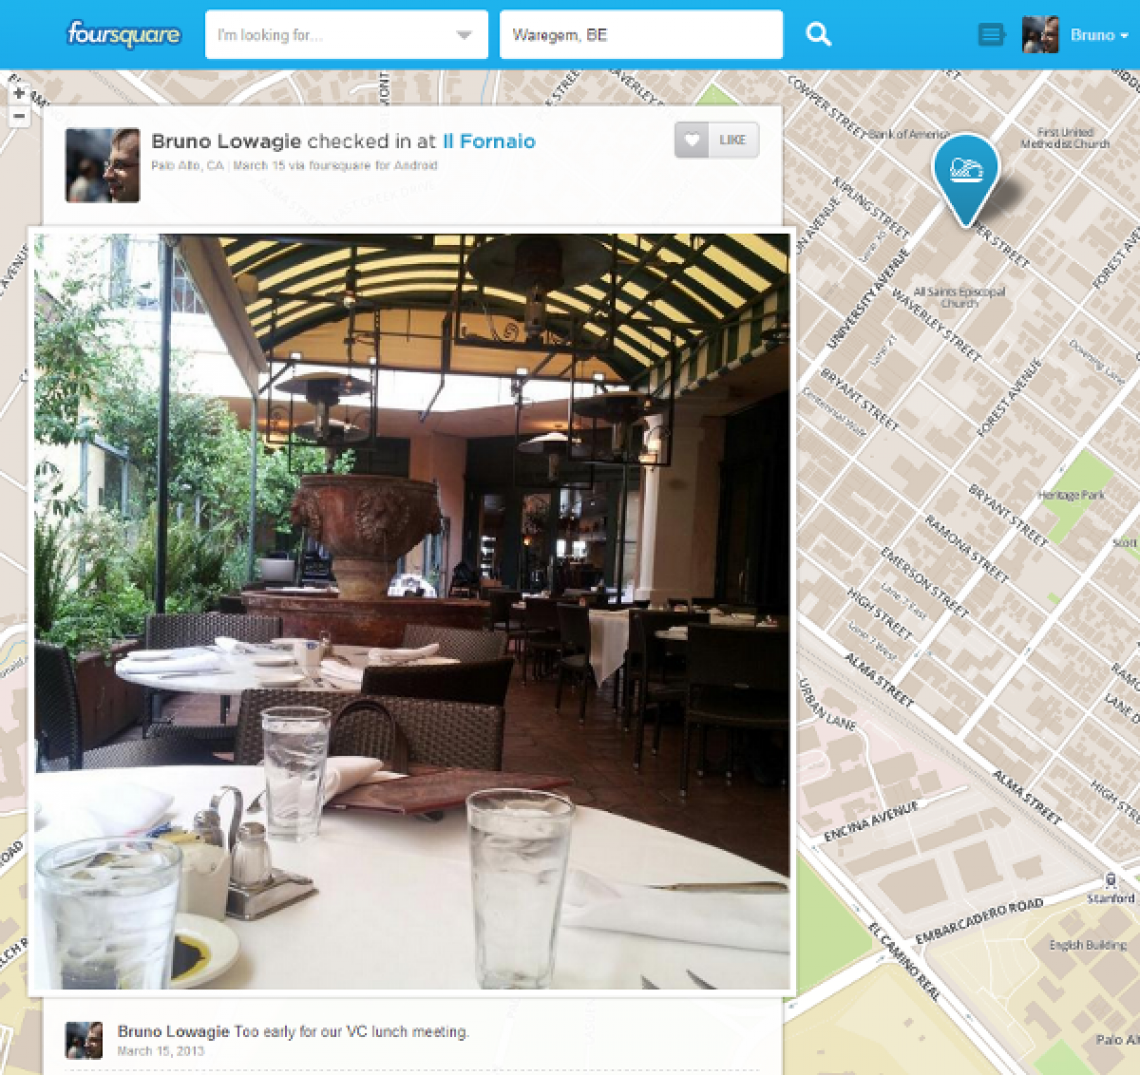 Visit to Il Fornaio, the restaurant where Silicon Valley VCs meet